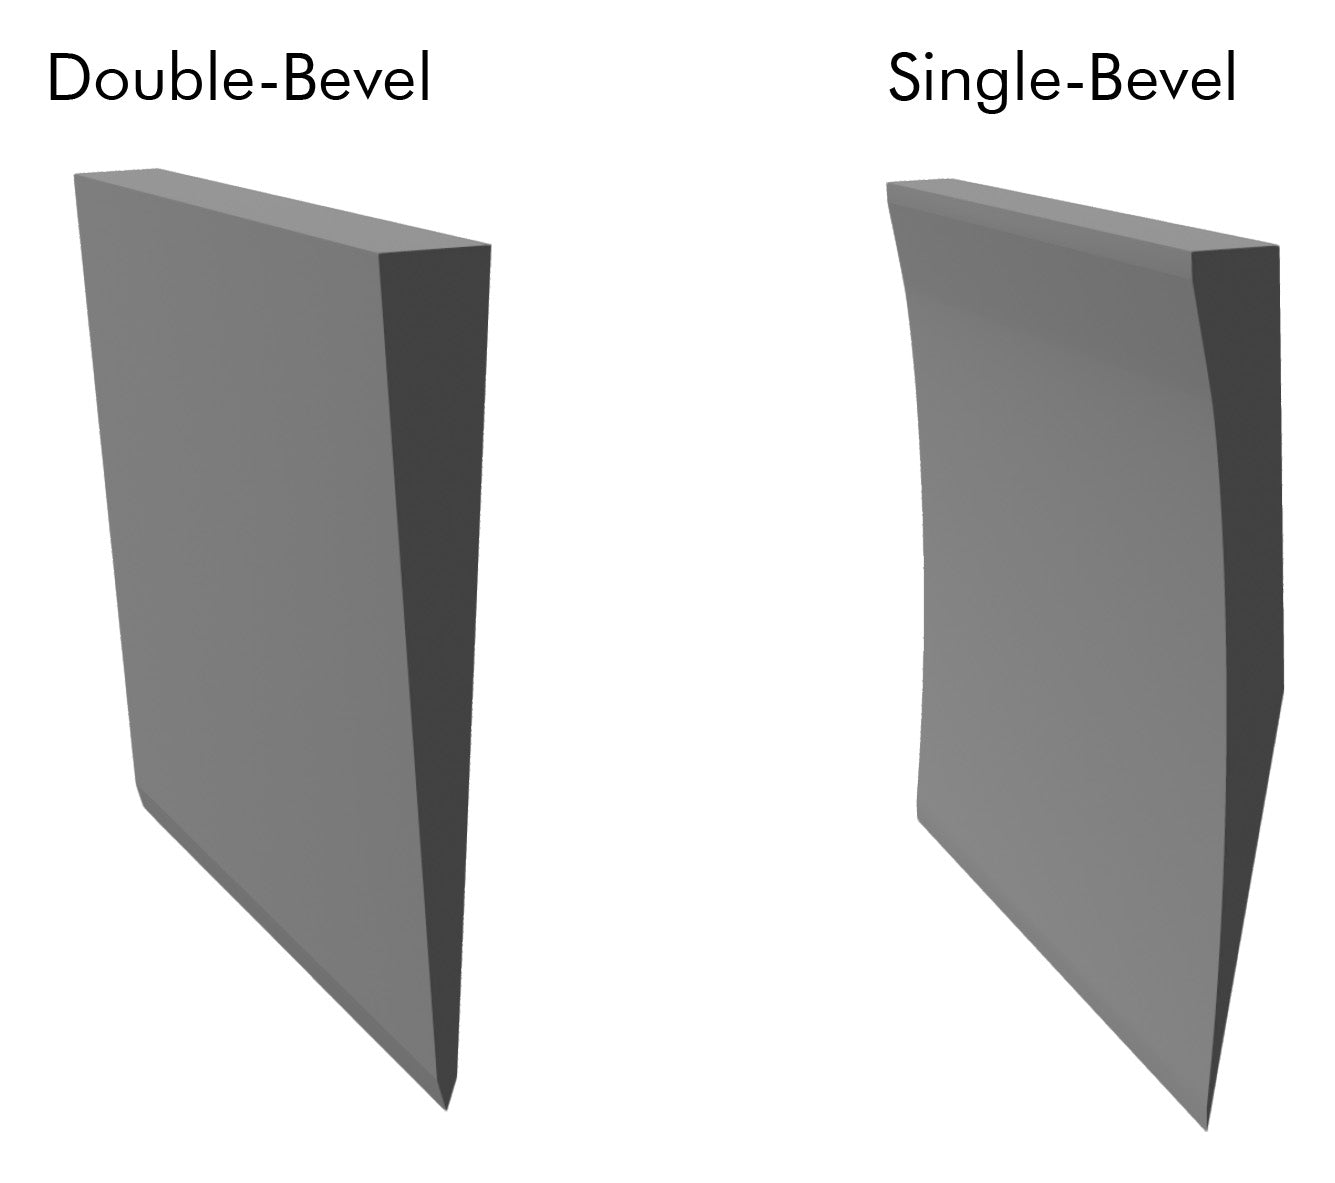 Perspective Rendition Of Double and Single-Bevel Blade Cross-Section